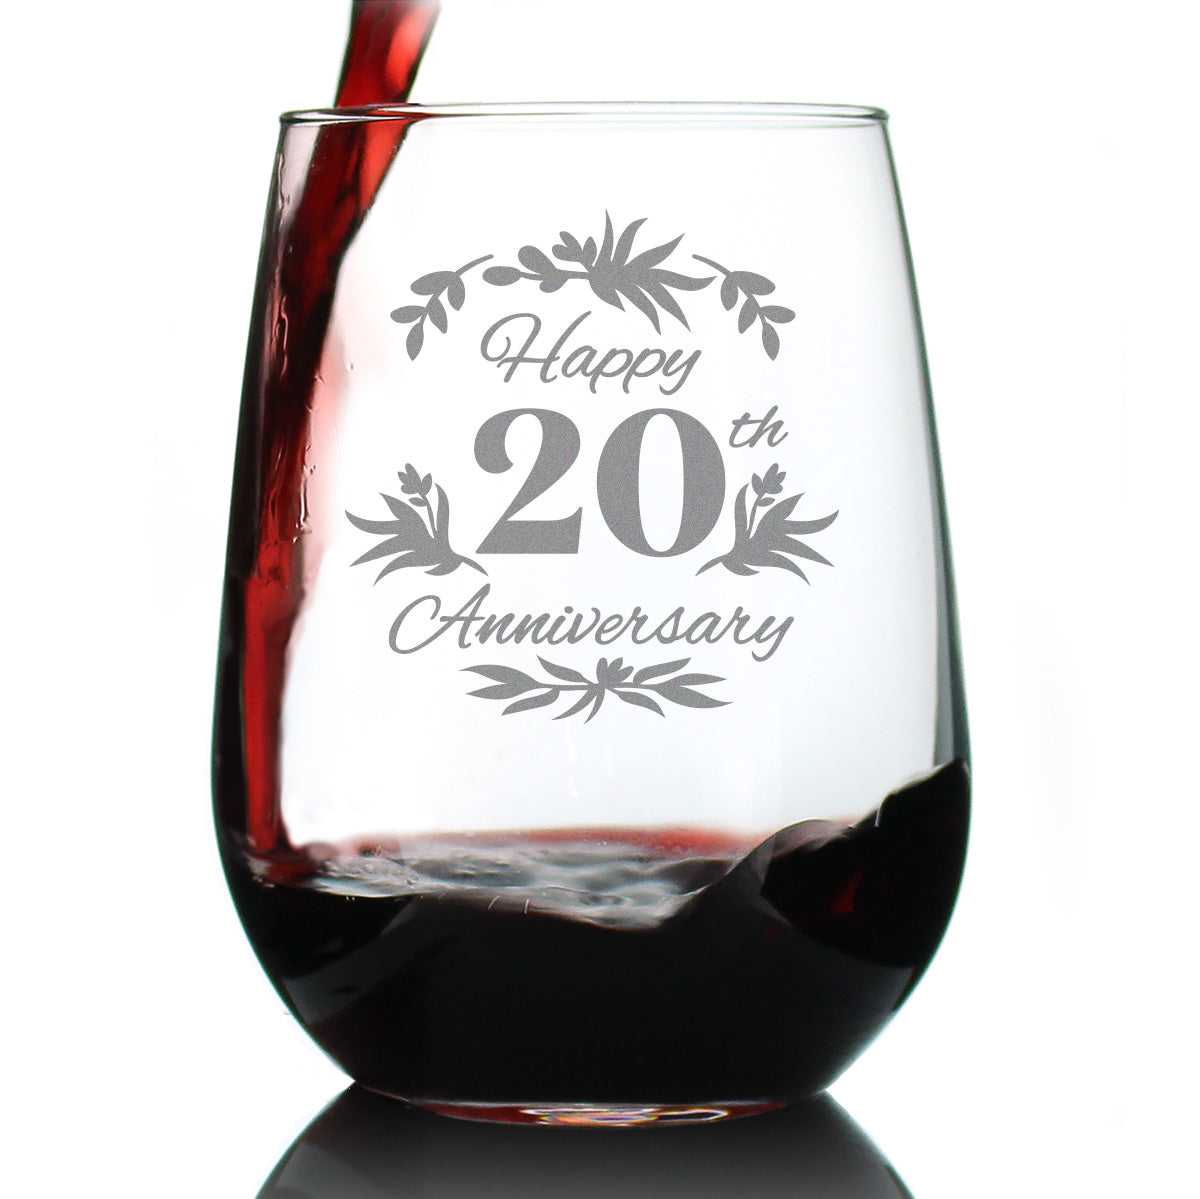 Happy 20th Anniversary - Stemless Wine Glass Gifts for Women &amp; Men - 20 Year Anniversary Party Decor - Large Glasses